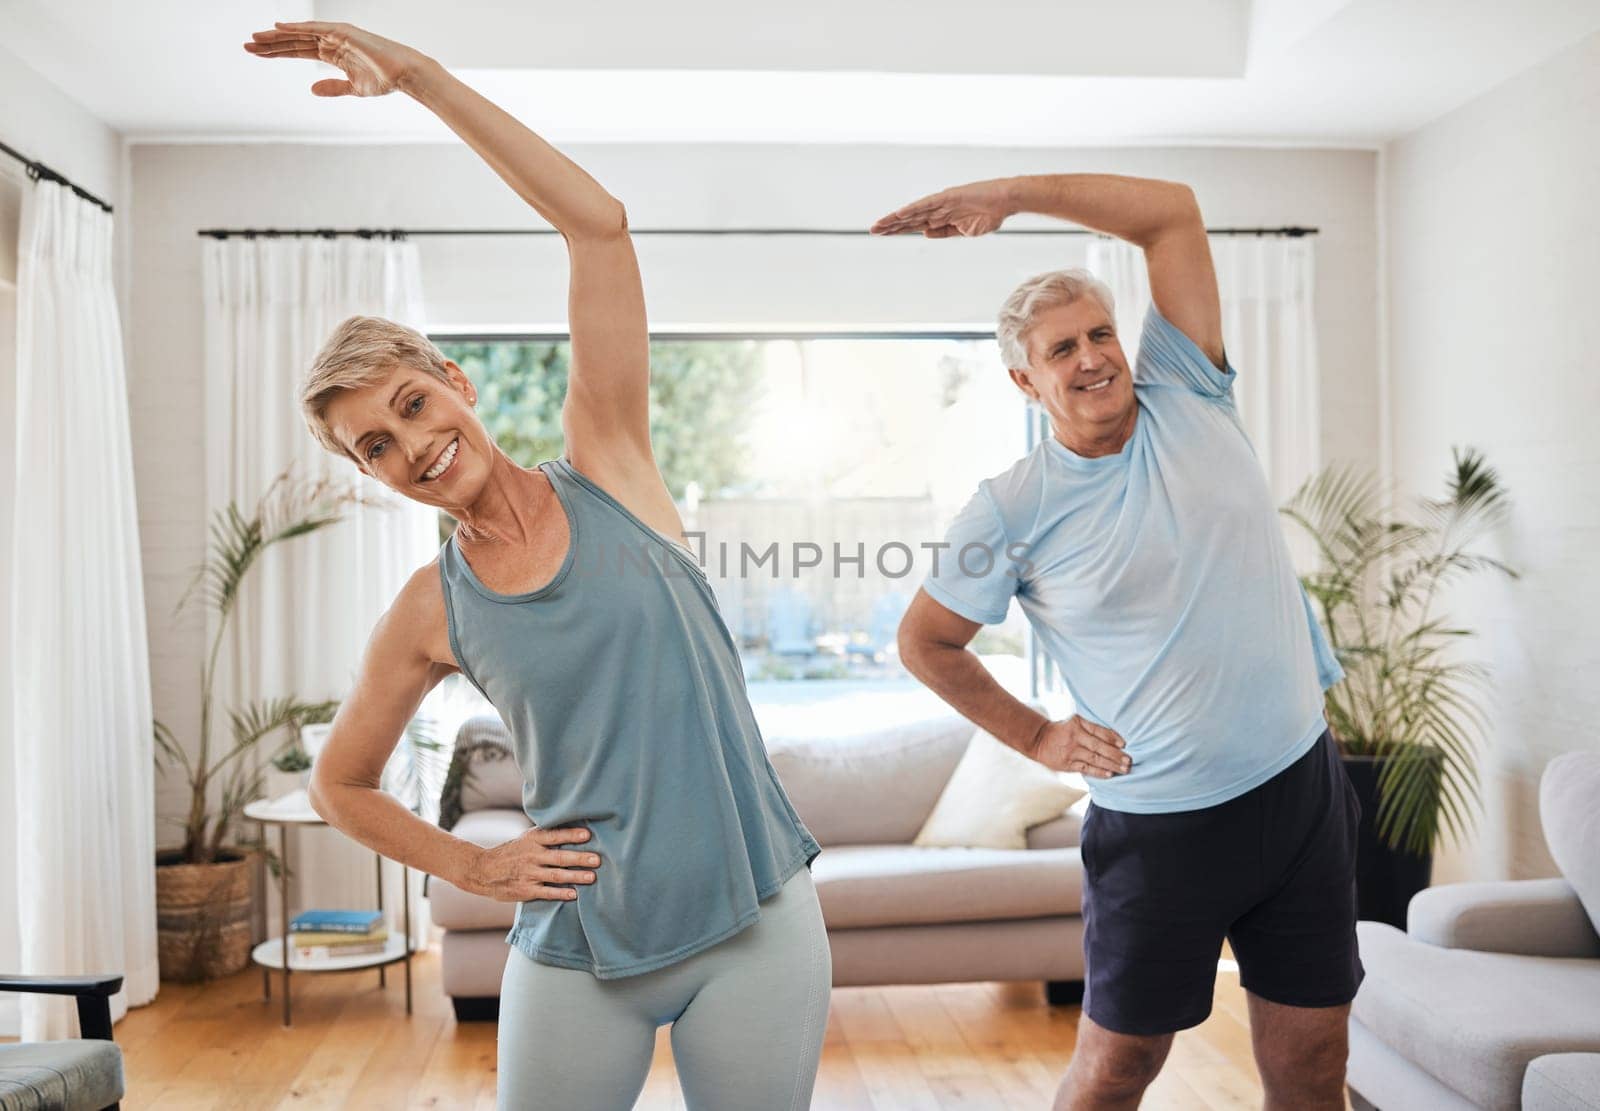 Stretching, yoga and fitness with a senior couple doing an exercise, workout or training at home. Health and wellness, lifestyle and active with a fit elderly man and woman exercising in a house.